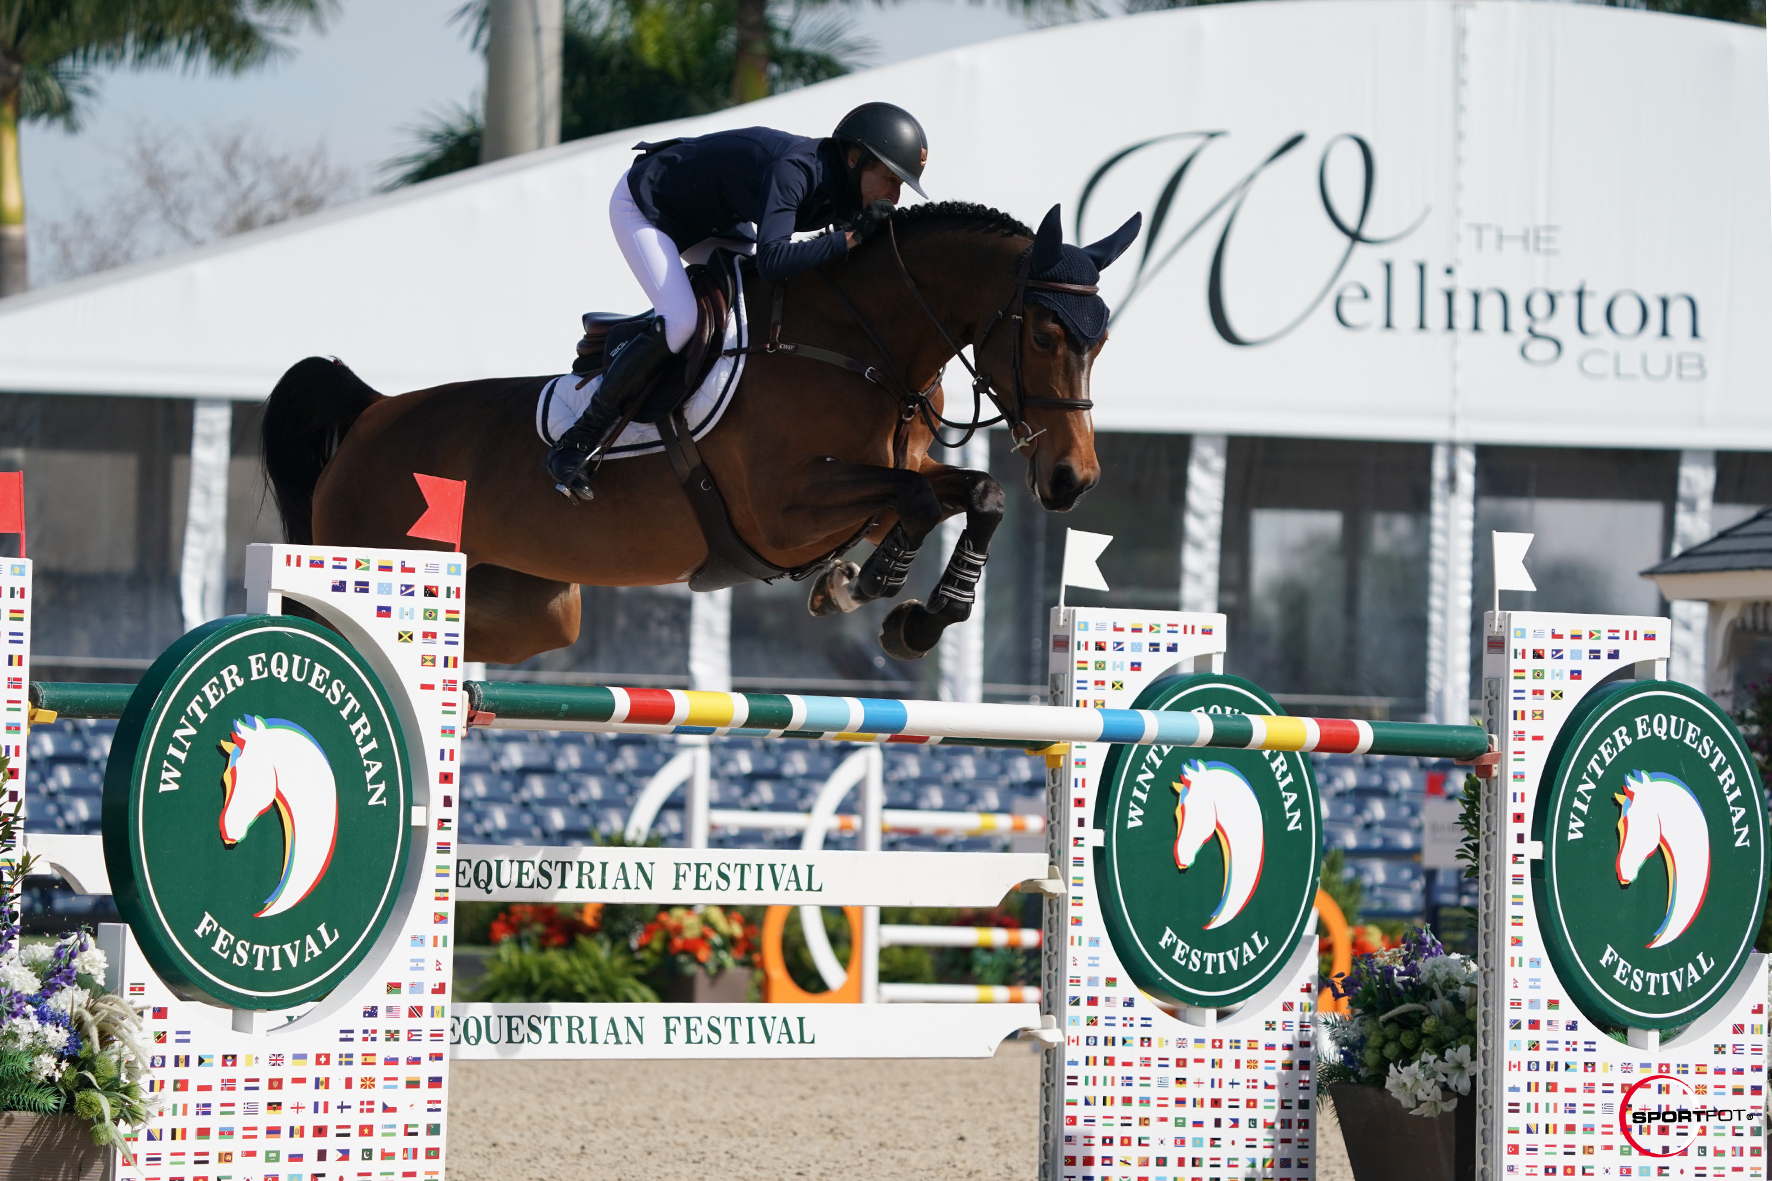 Molly Ashe Cawley and Berdien capture the $37,000 CaptiveOne Advisors 1.50m Jumper Classic